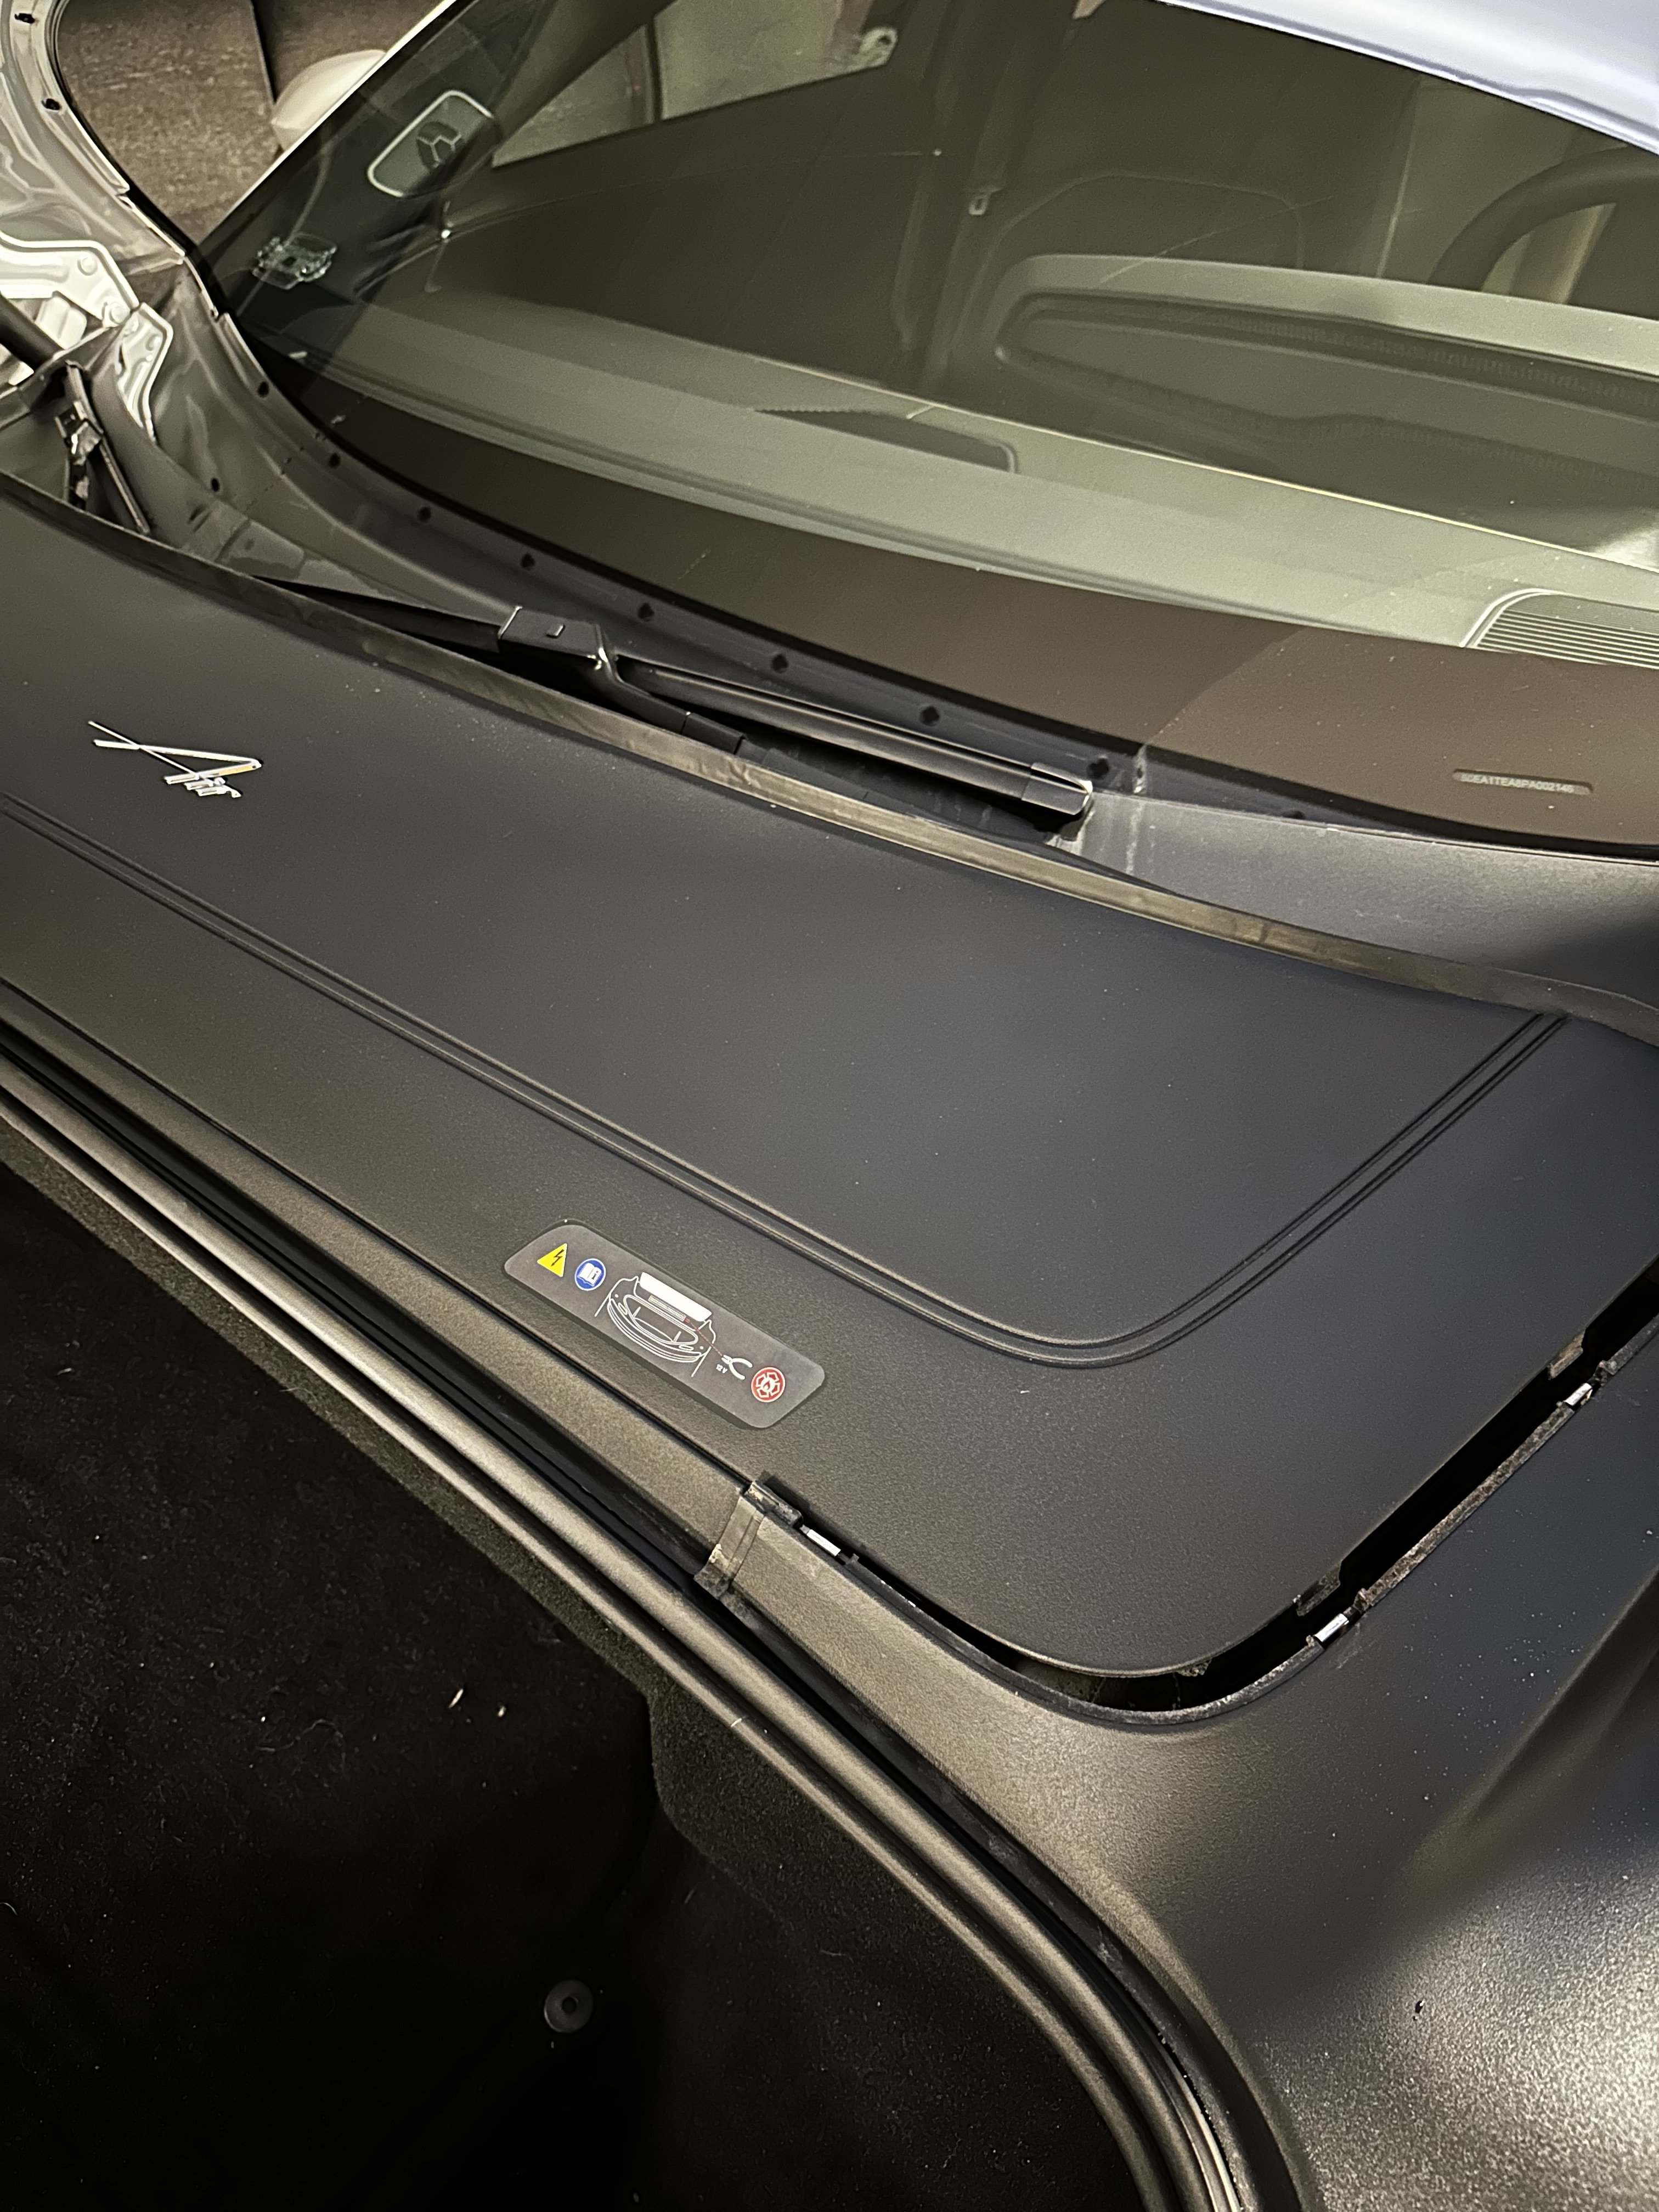 Under the frunk of the Lucid Air. Top plastic cover.